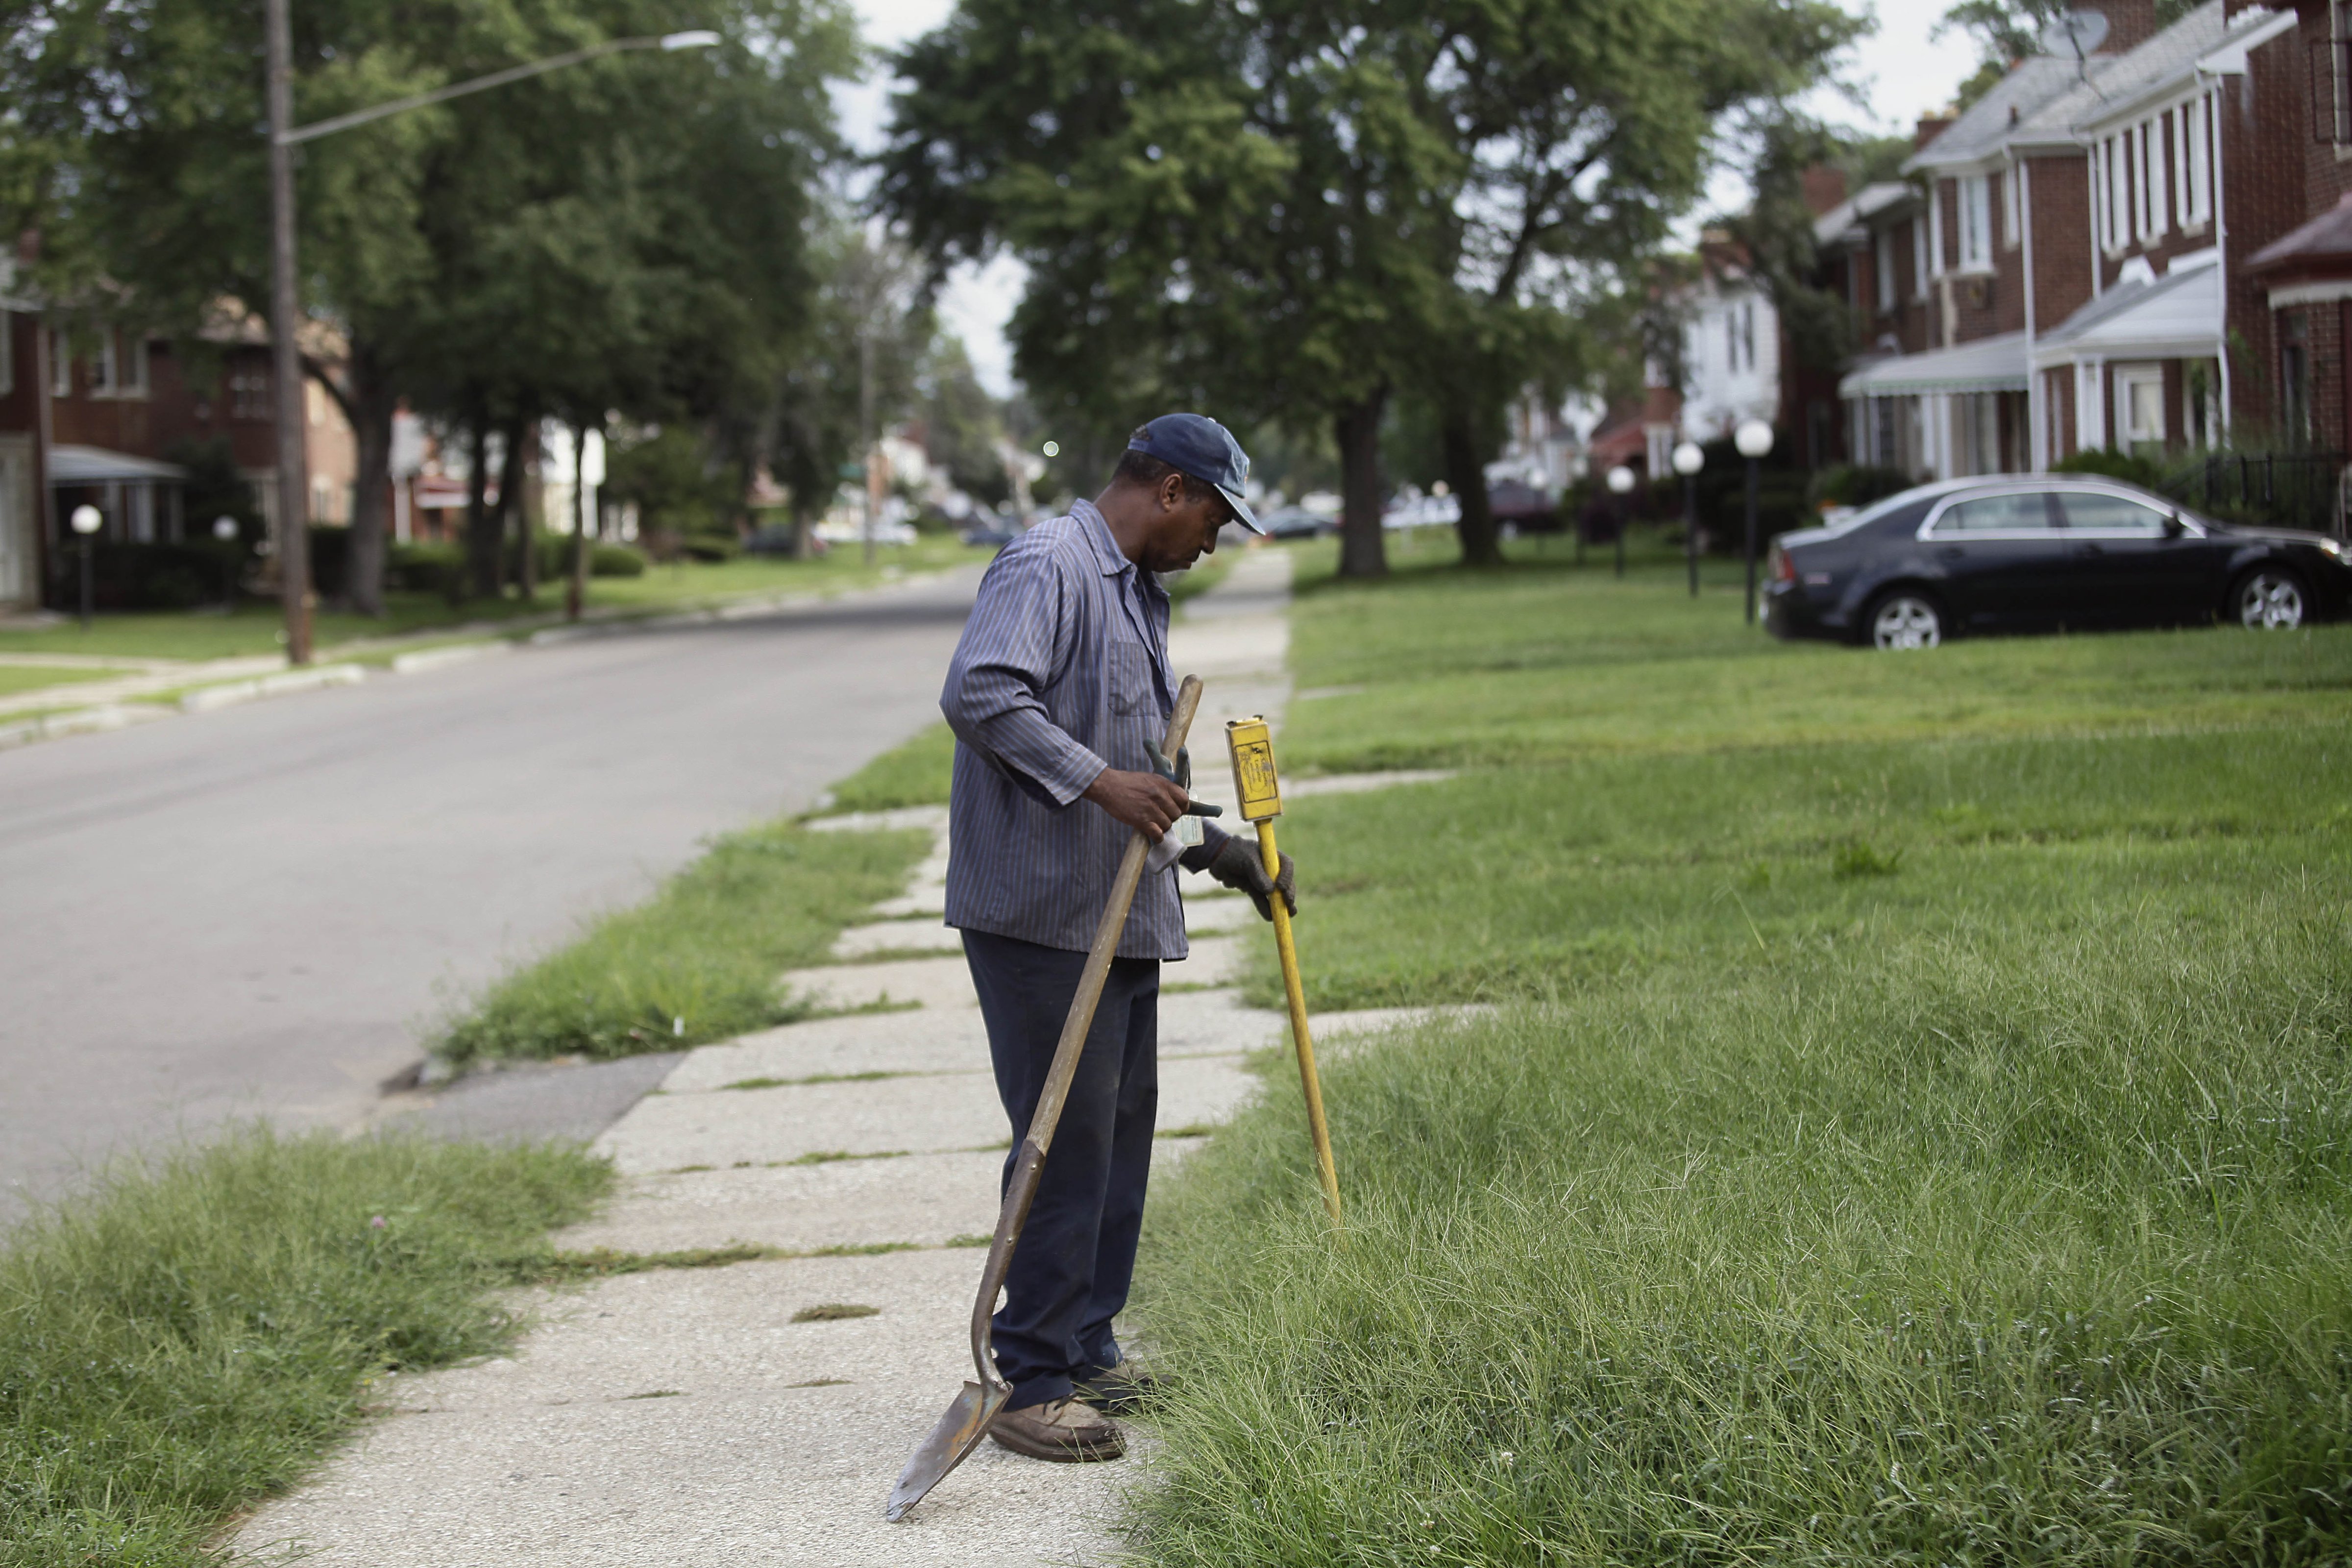 A worker from Homrich turns off water supply to a home August 27, 2014 in Detroit, Michigan. The Detroit Water and Sewer Department have disconnected water to thousands of Detroit residents who are delinquent with their bills. (Joshua Lott—Getty Images)